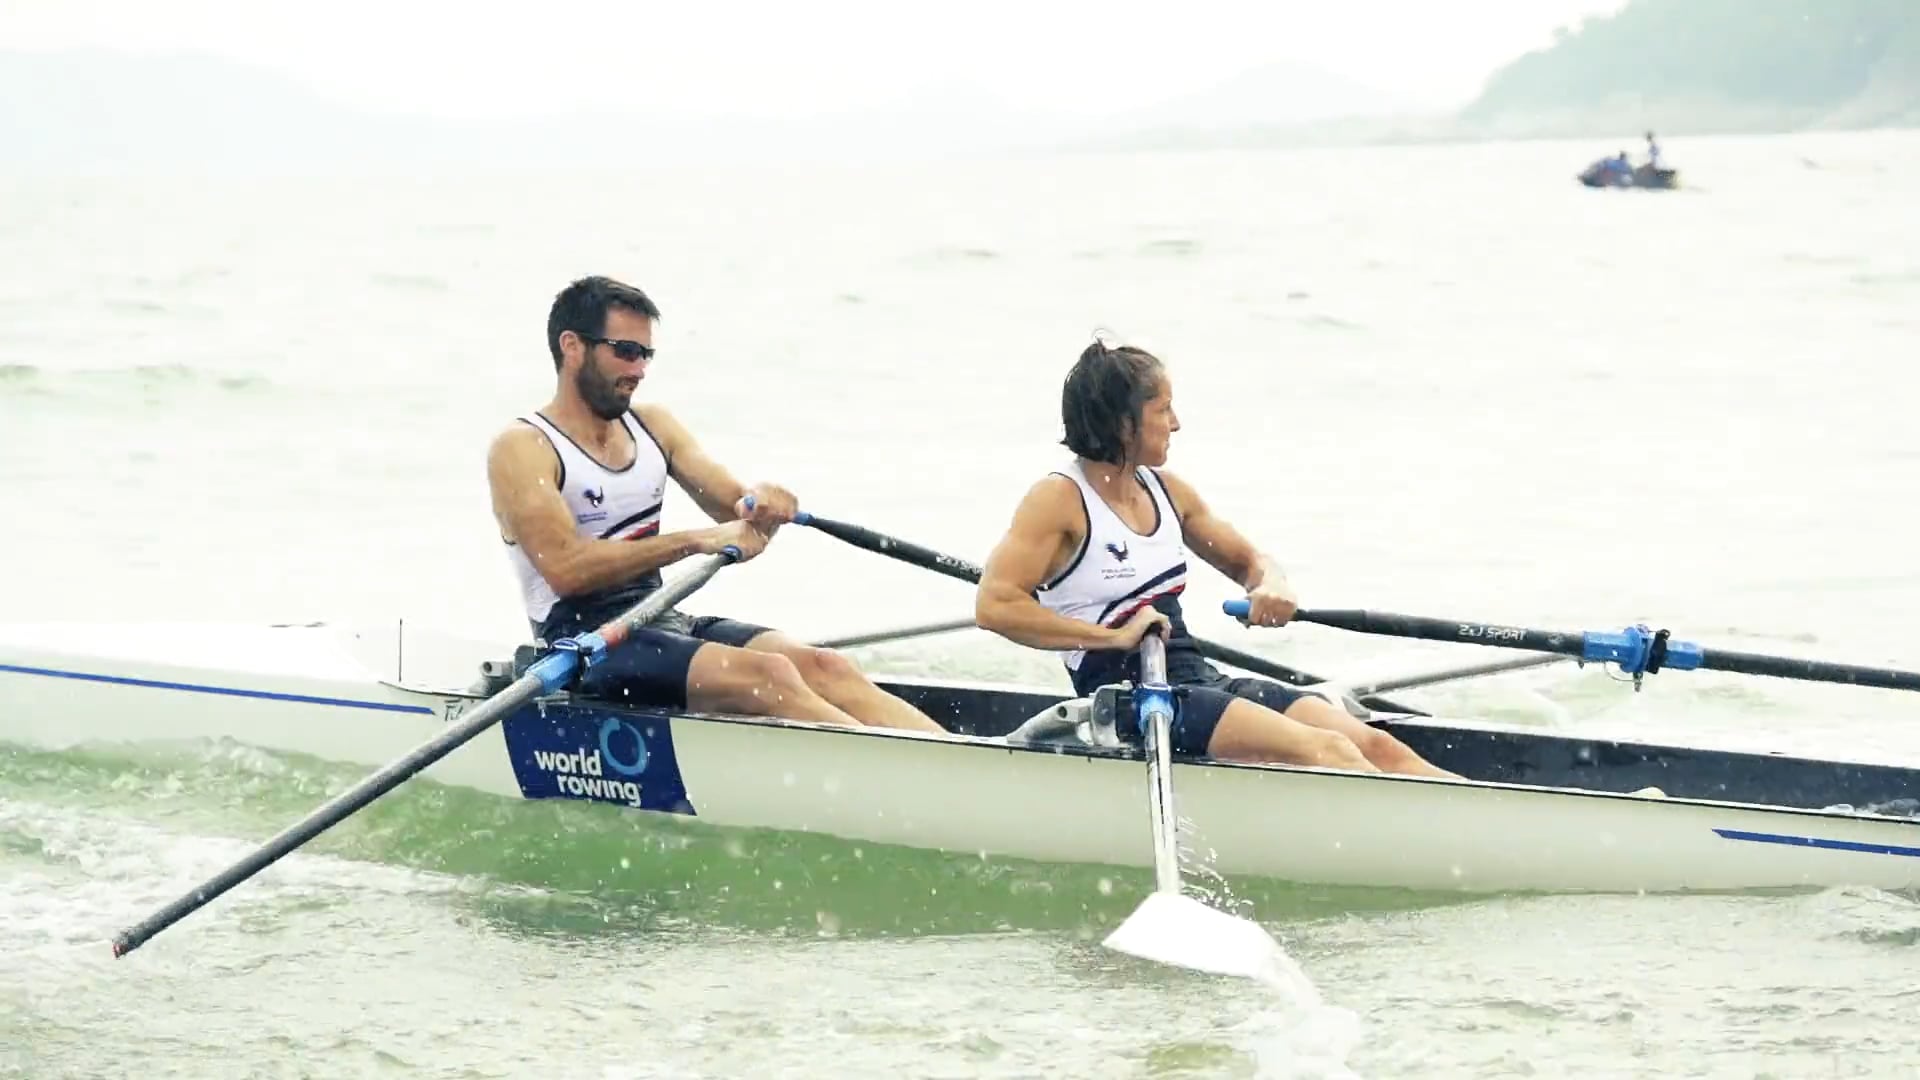 Chinese rowers rule at World Rowing Beach Sprint Finals in Shenzhen (CHN) on Vimeo